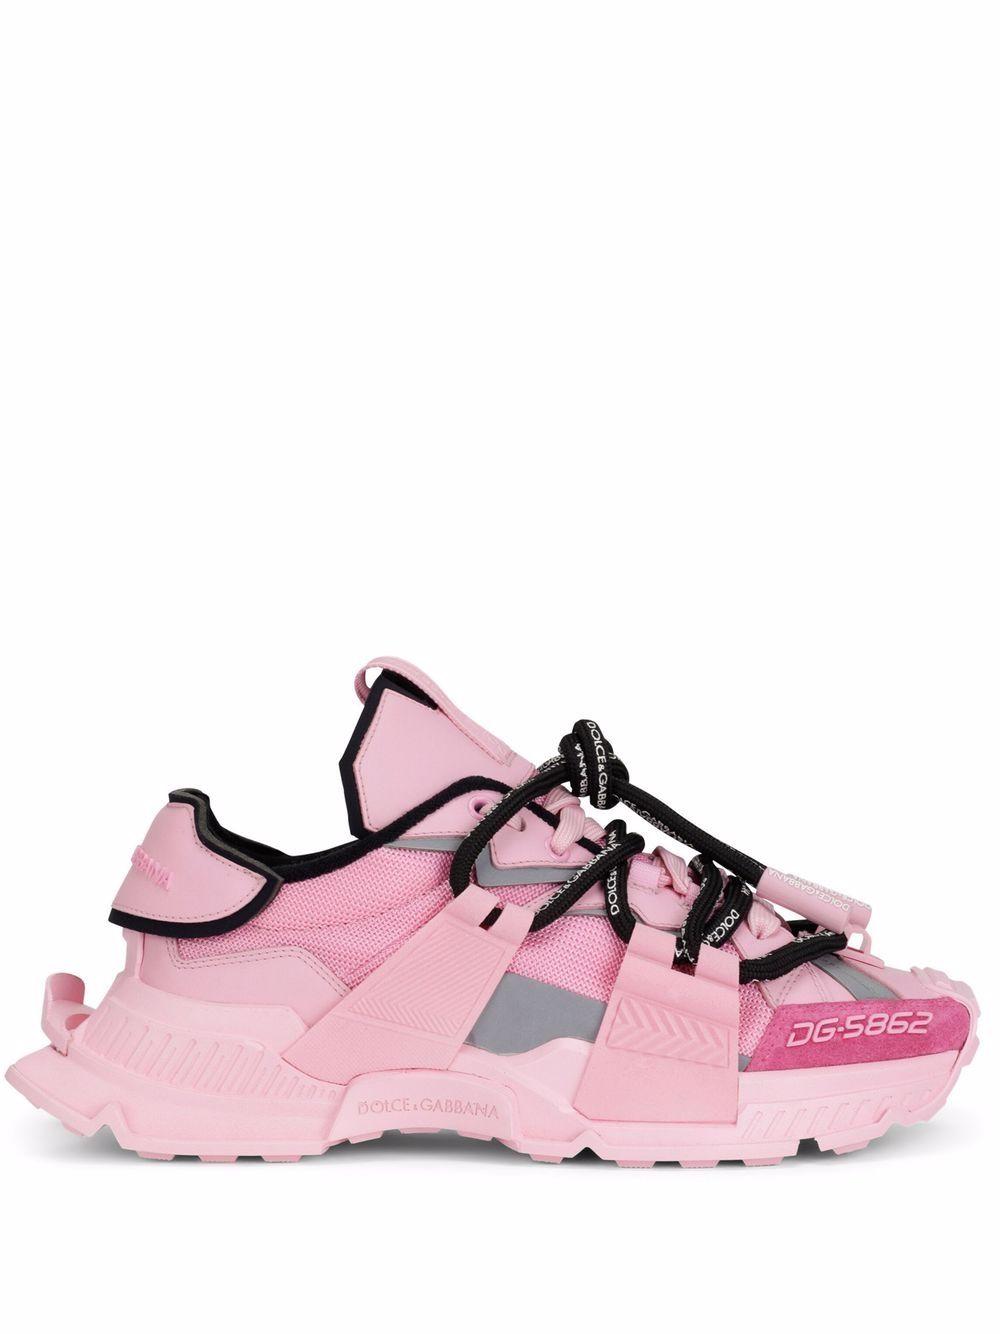 Dolce & Gabbana Leather Sneakers Fuchsia in Pink - Save 40% | Lyst